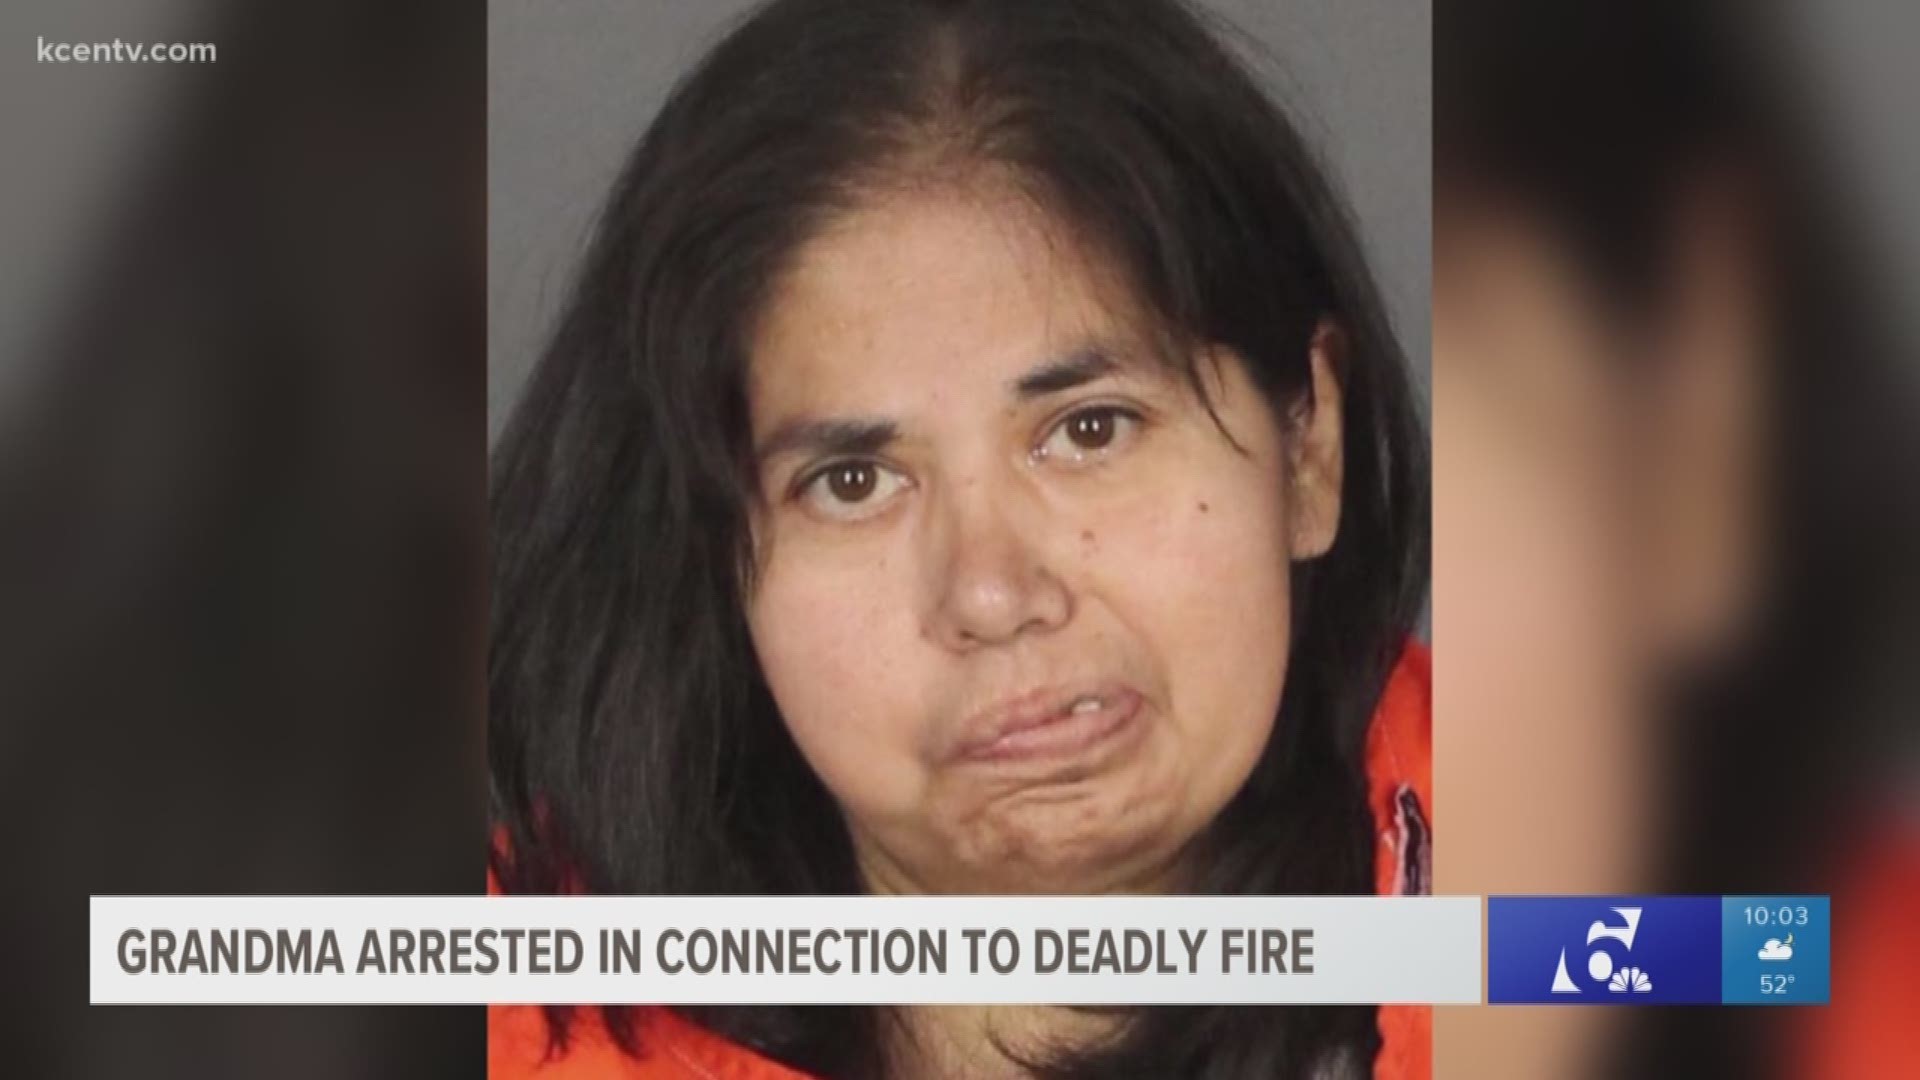 Detectives said they believe 44-year-old Andrea Aleman's actions were reckless and contributed to the deaths of both of the children, 4-year-old Anthony Cole Puenta and his 2-year-old sister, Rachel Rose Aleman.